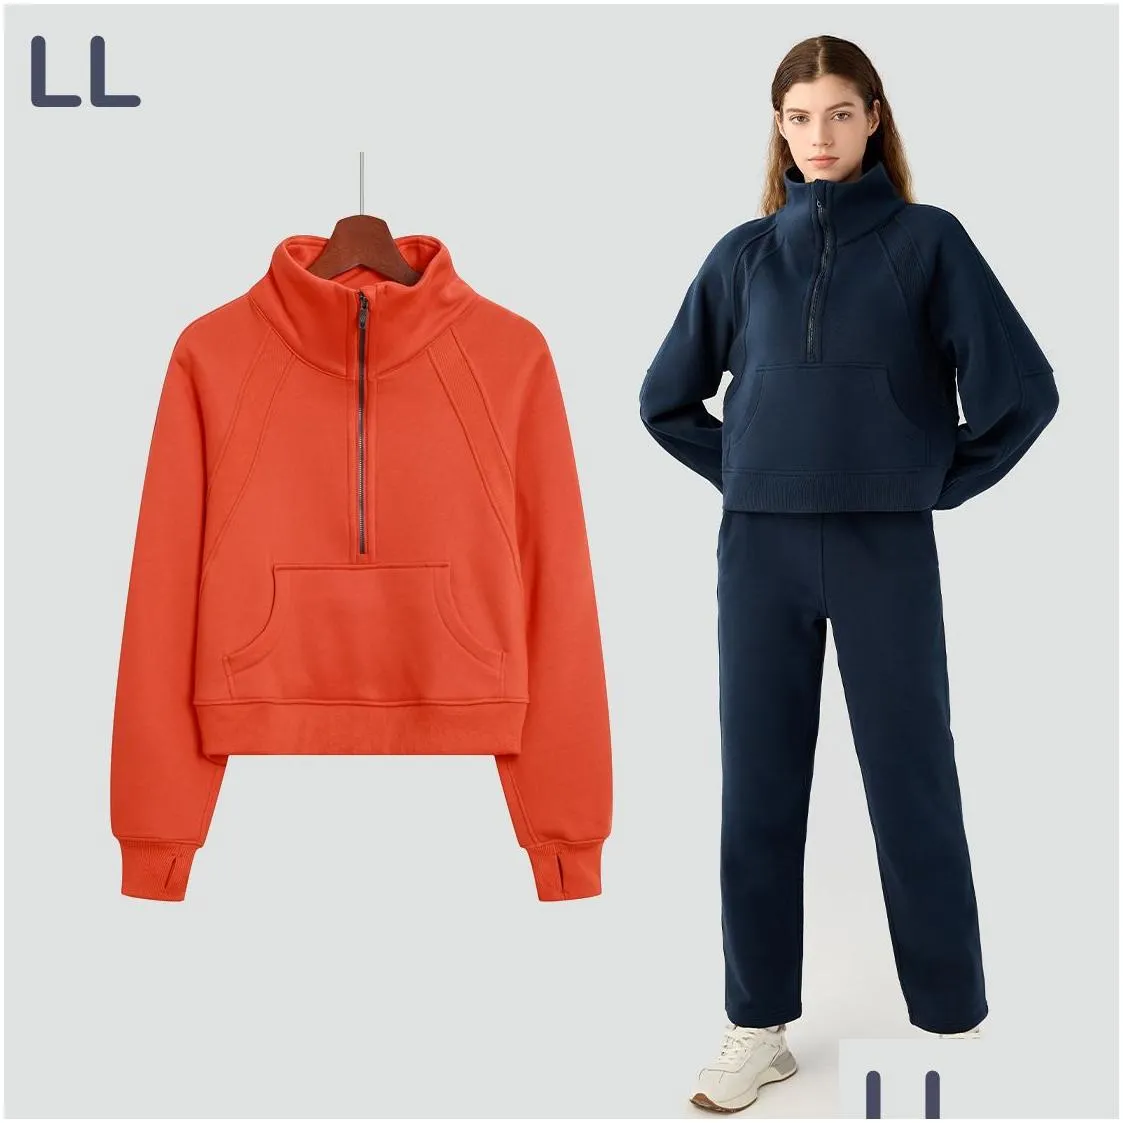 LU New Yoga Jacket SCA Half Zipper High Collar Pullover for Women`s Autumn/Winter Outwear Casual Running Warm Brushed Thickened Sports Sweater Versatile Sports